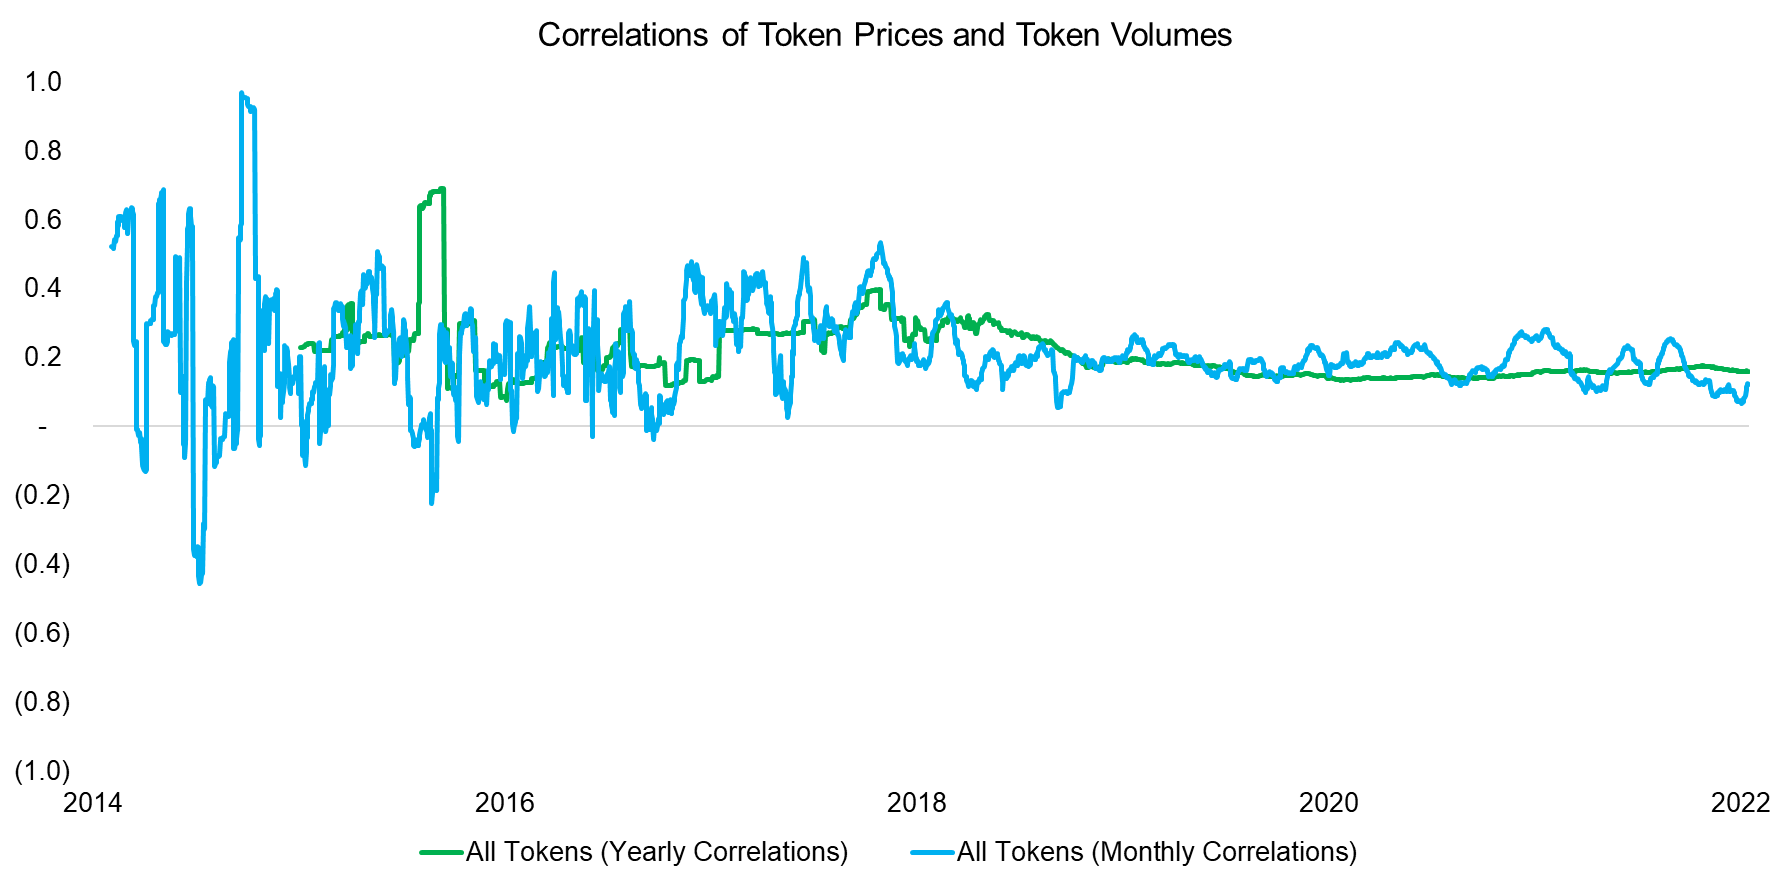 Correlations of Token Prices and Token Volumes